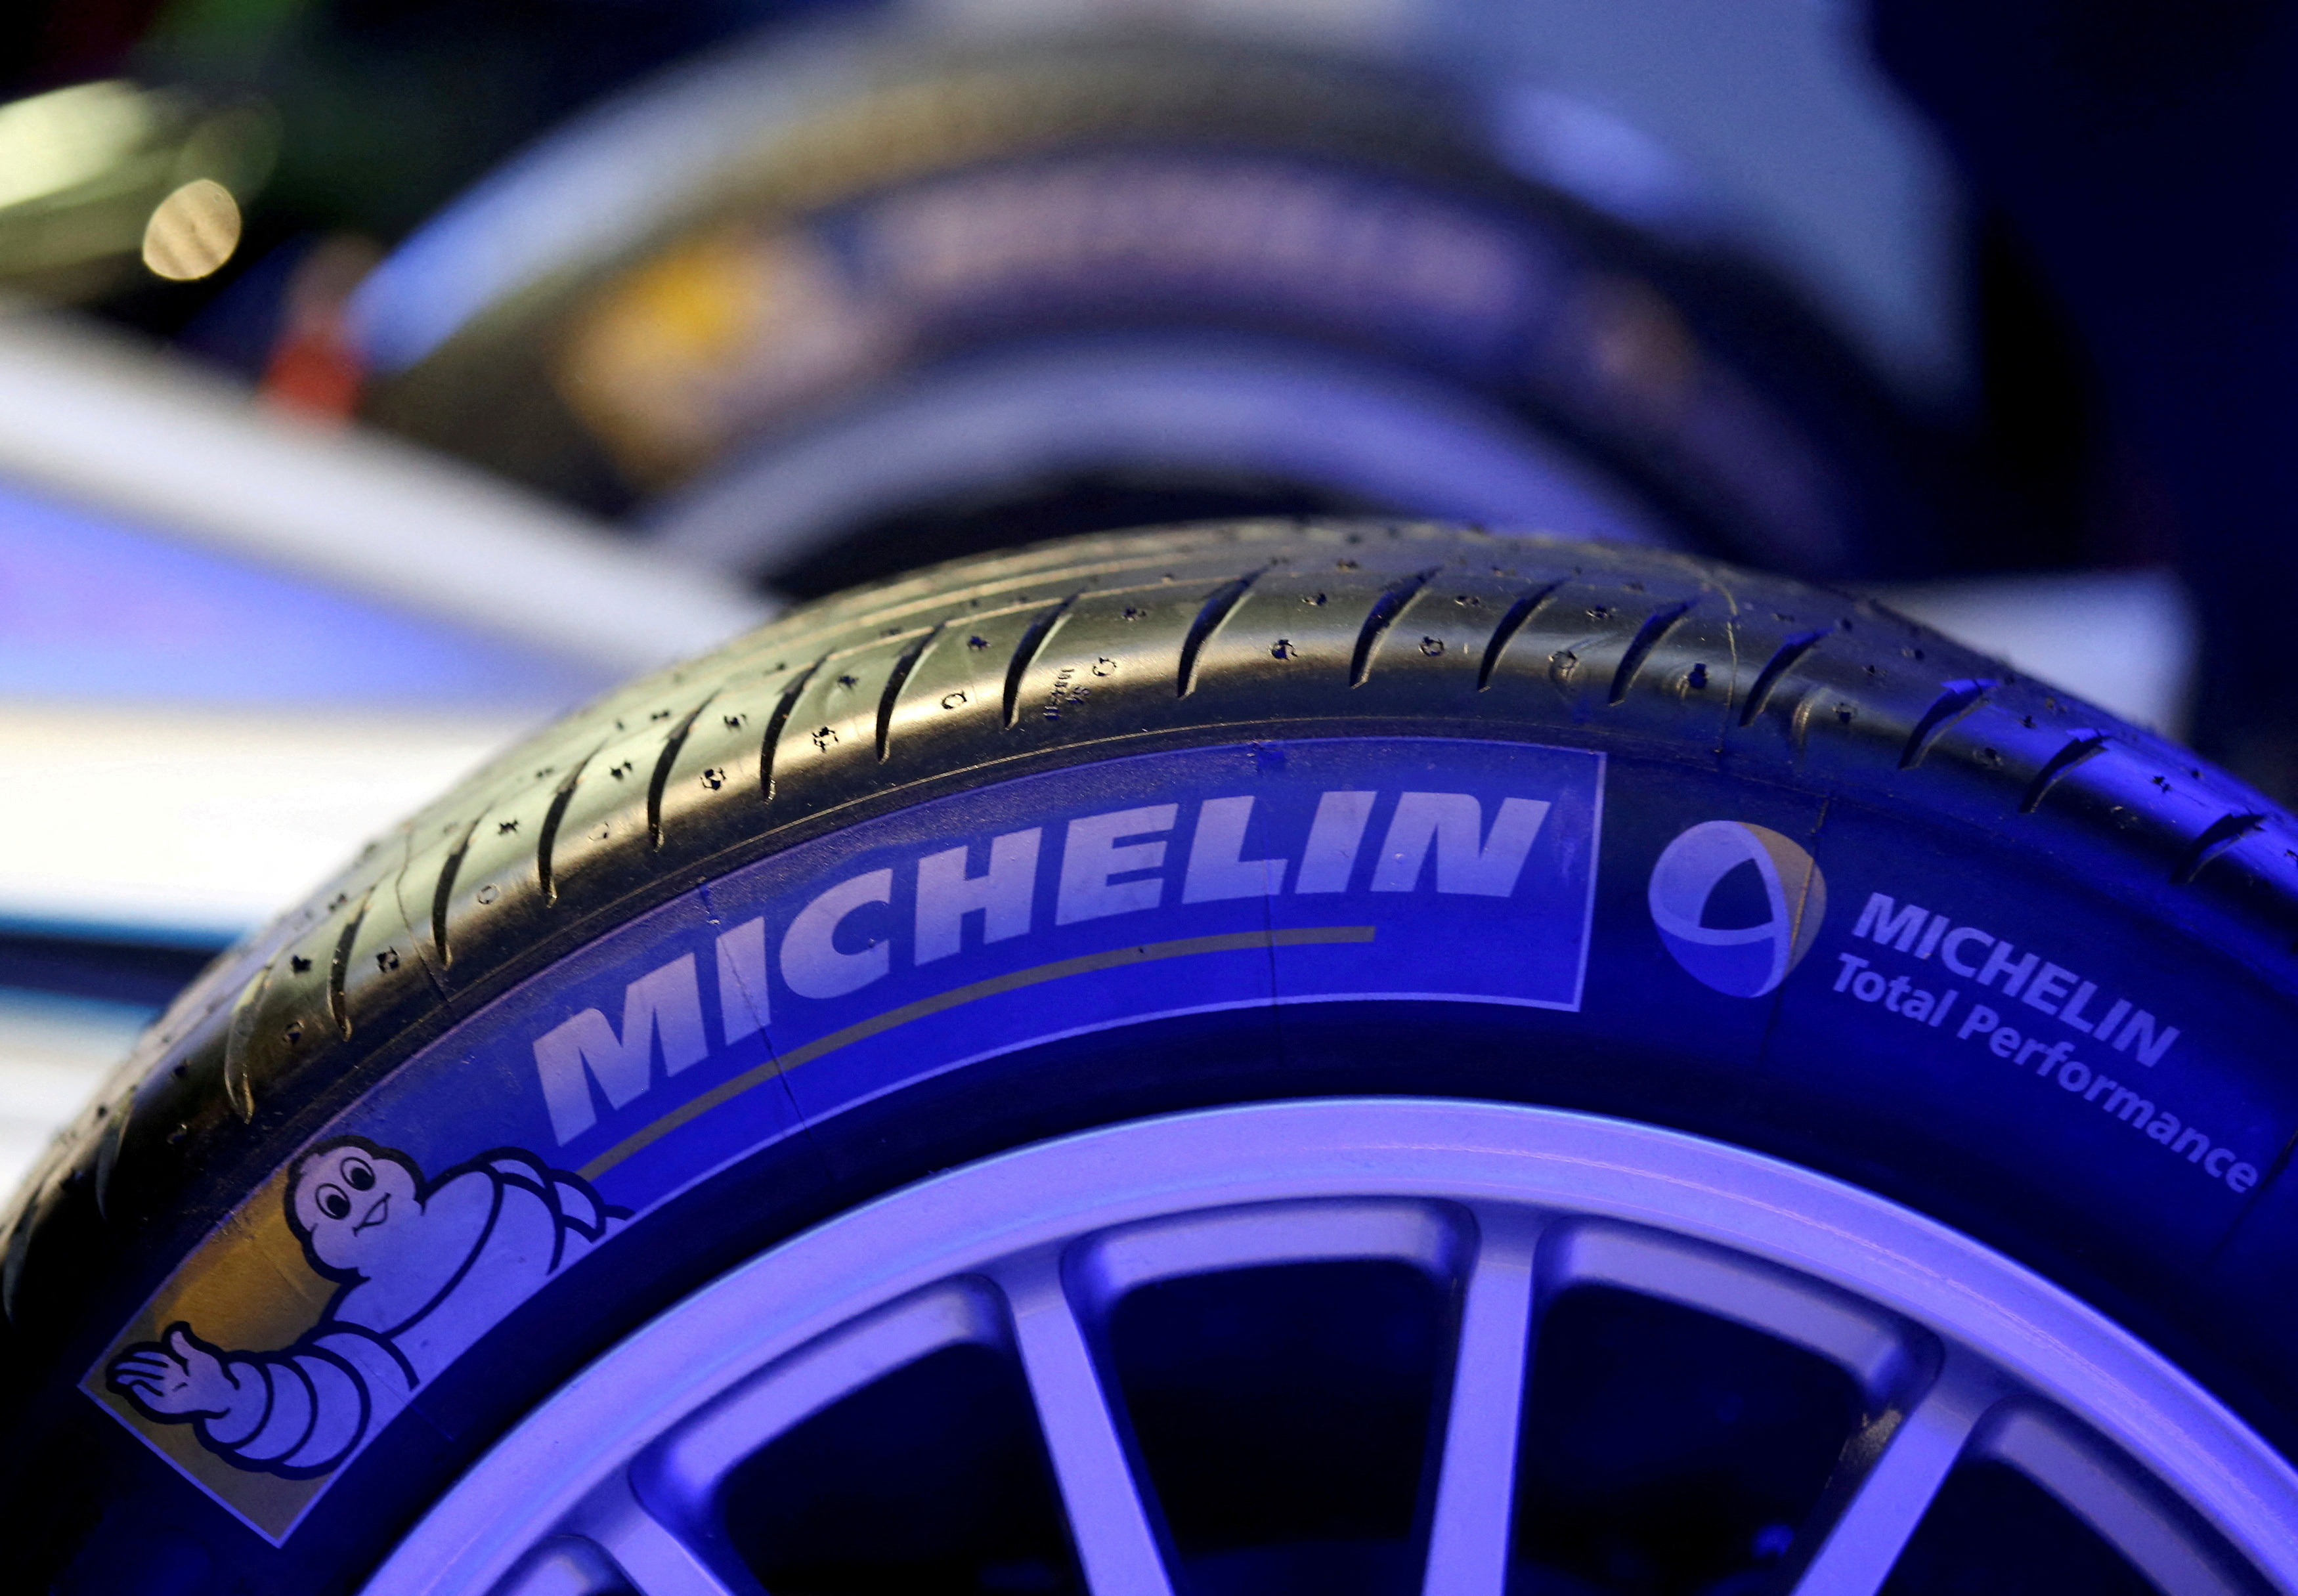 The logo of French tyre maker Michelin is seen on a Formula E racing car in Rome, Italy